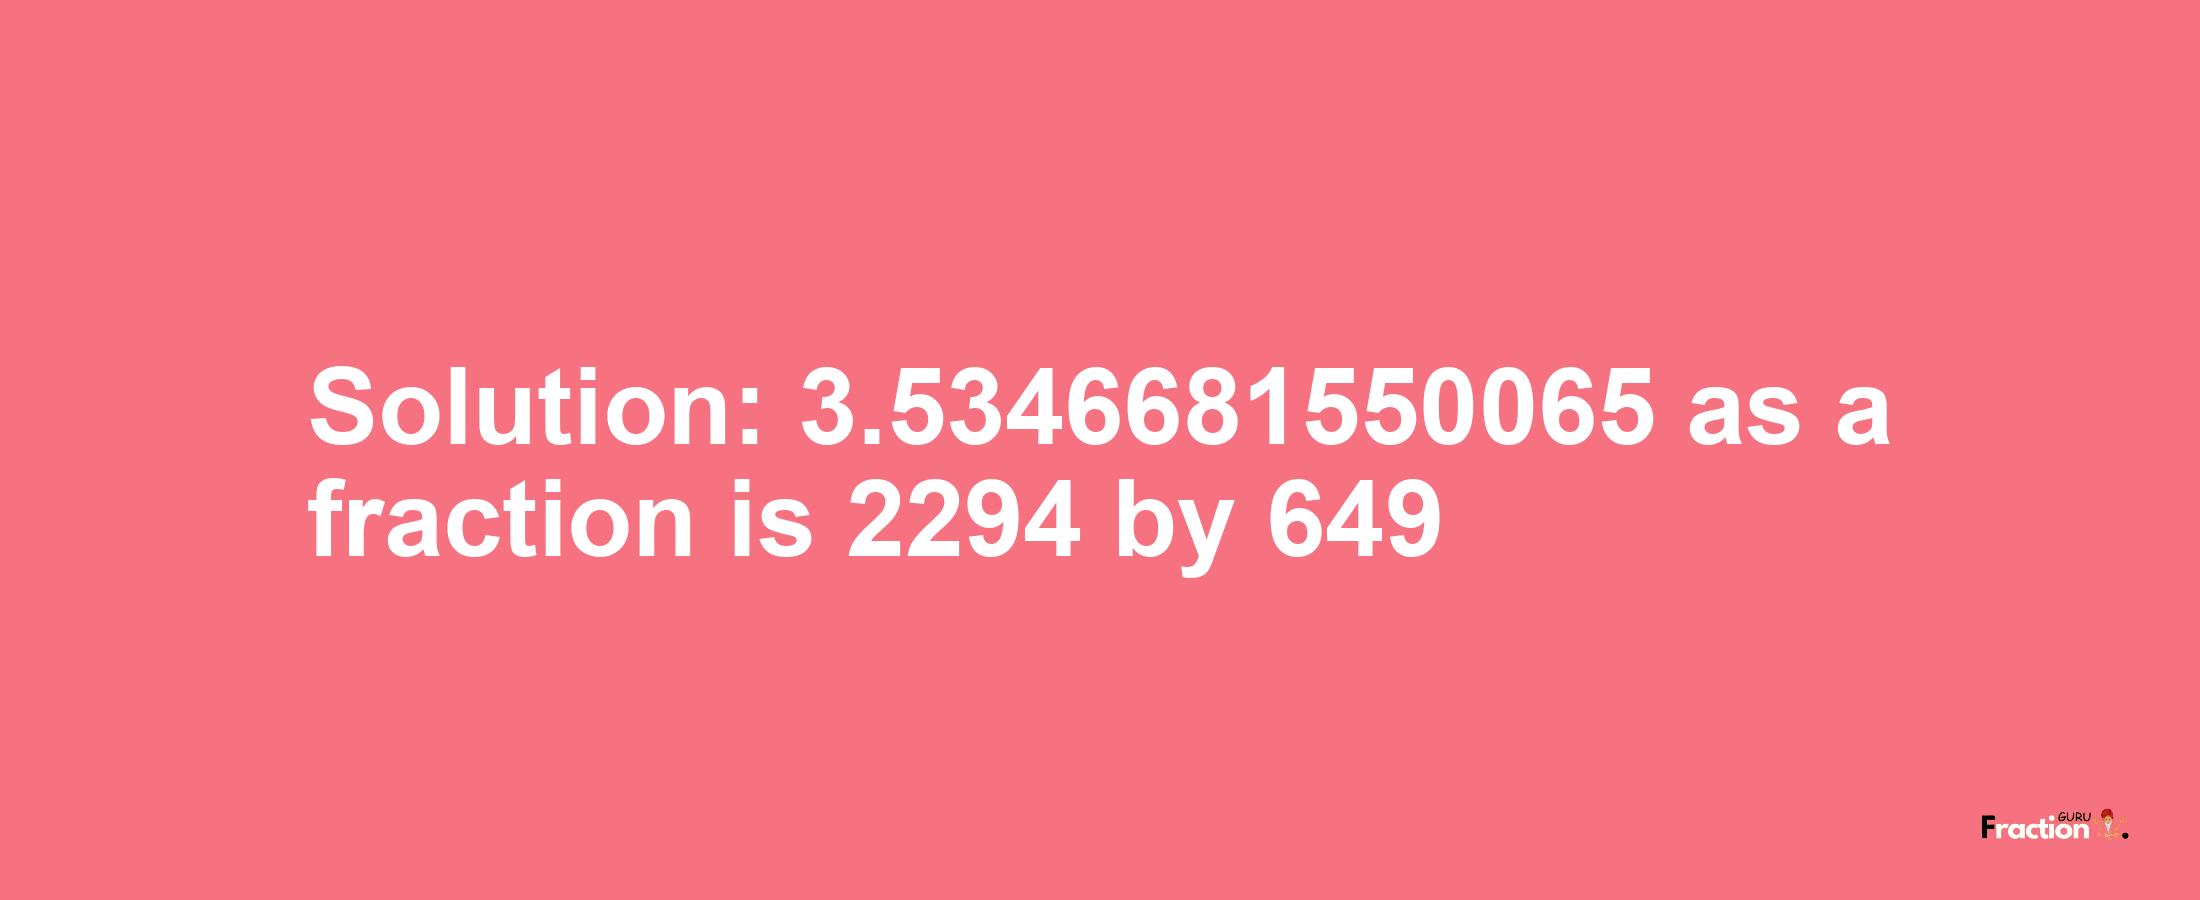 Solution:3.5346681550065 as a fraction is 2294/649